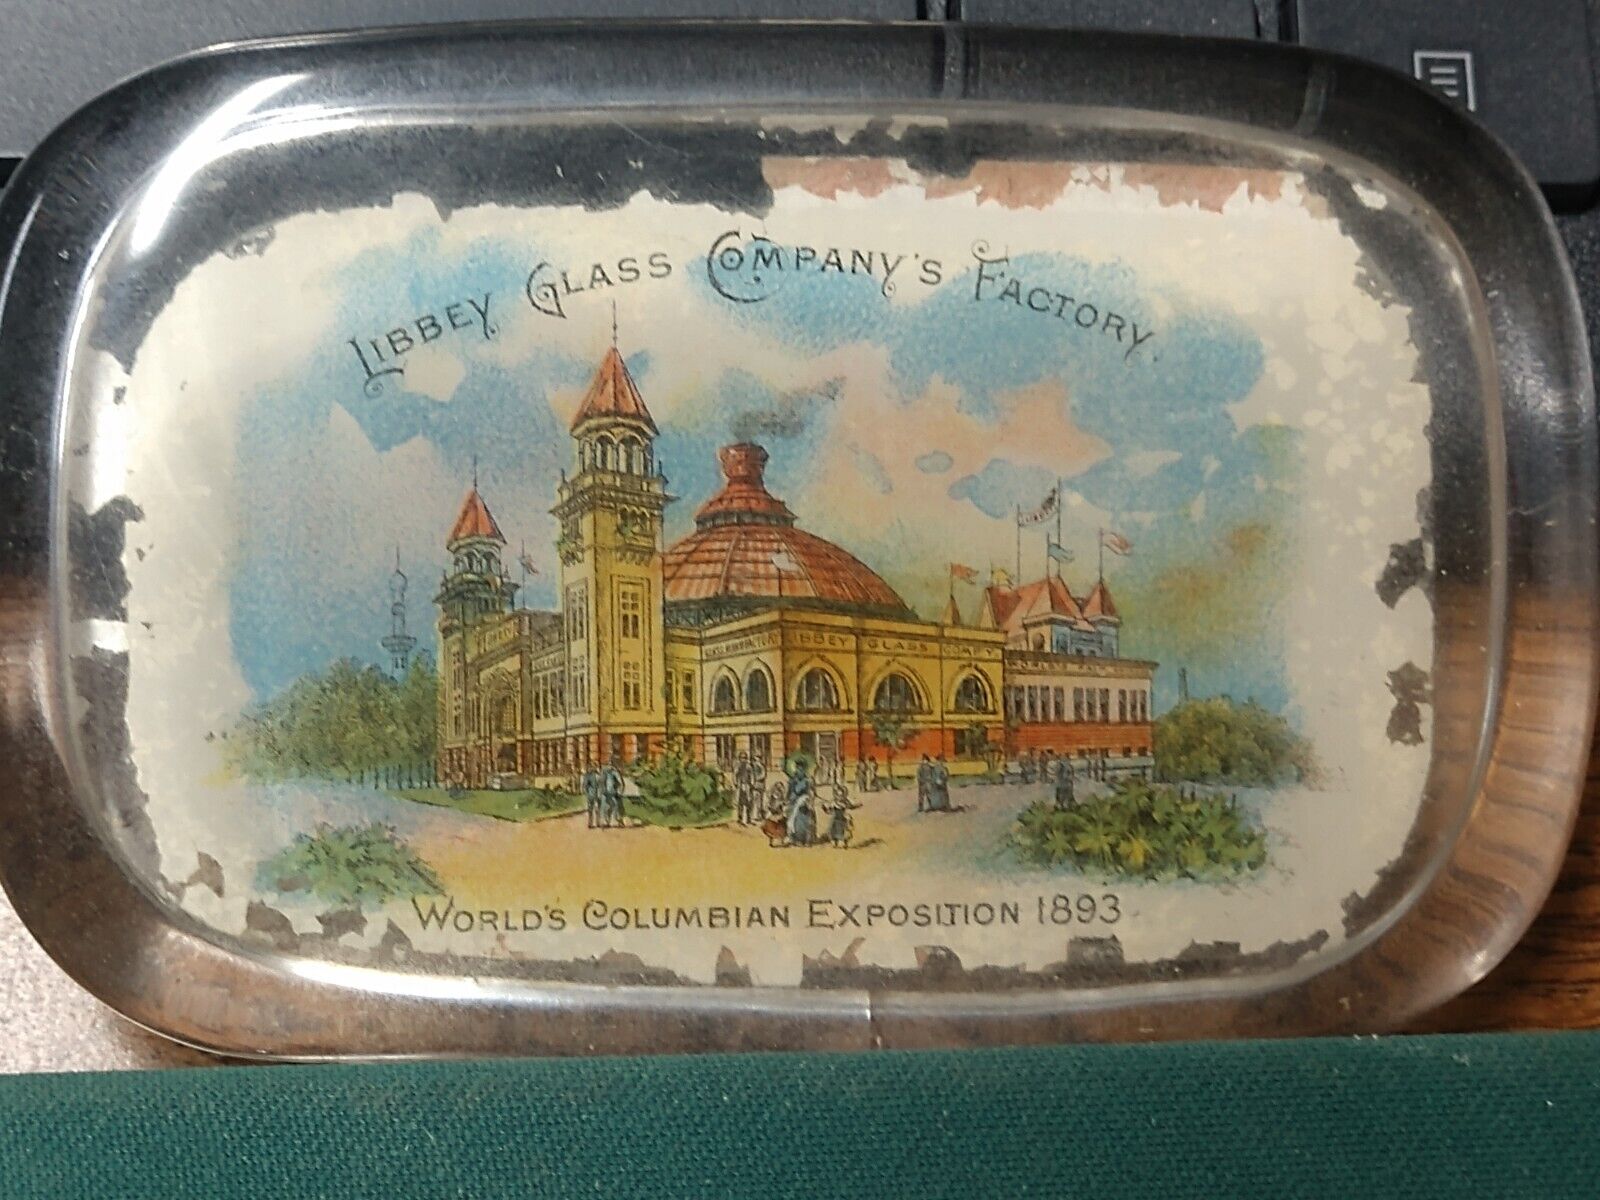 VINTAGE 1893 COLUMBIAN EXPOSITION LIBBEY GLASS COMPANYS FACTORY PAPER WEIGHT